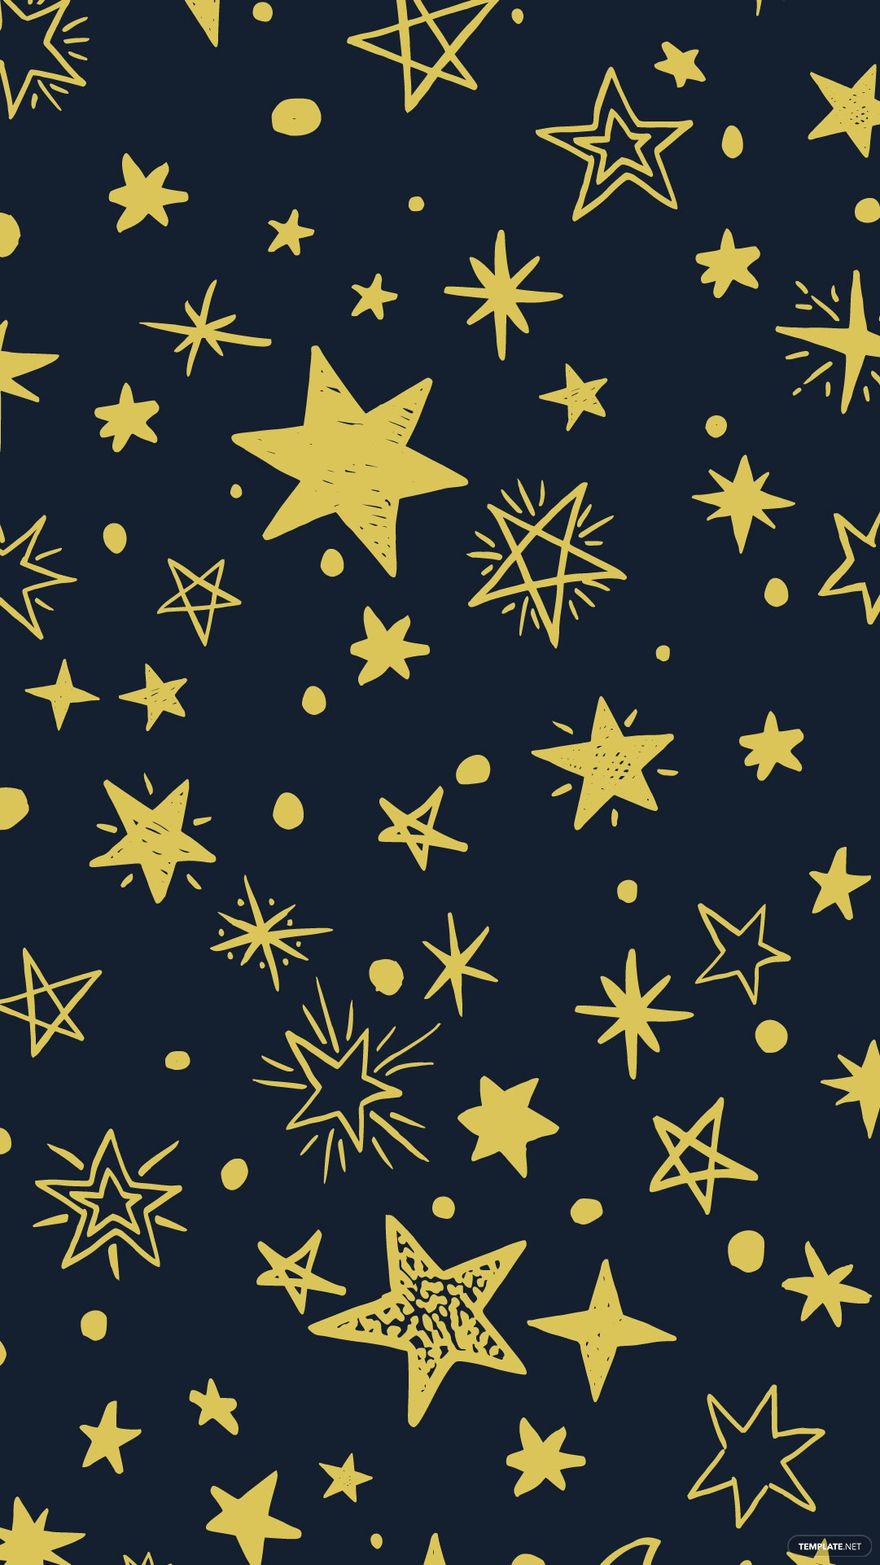 Free Android Star Background